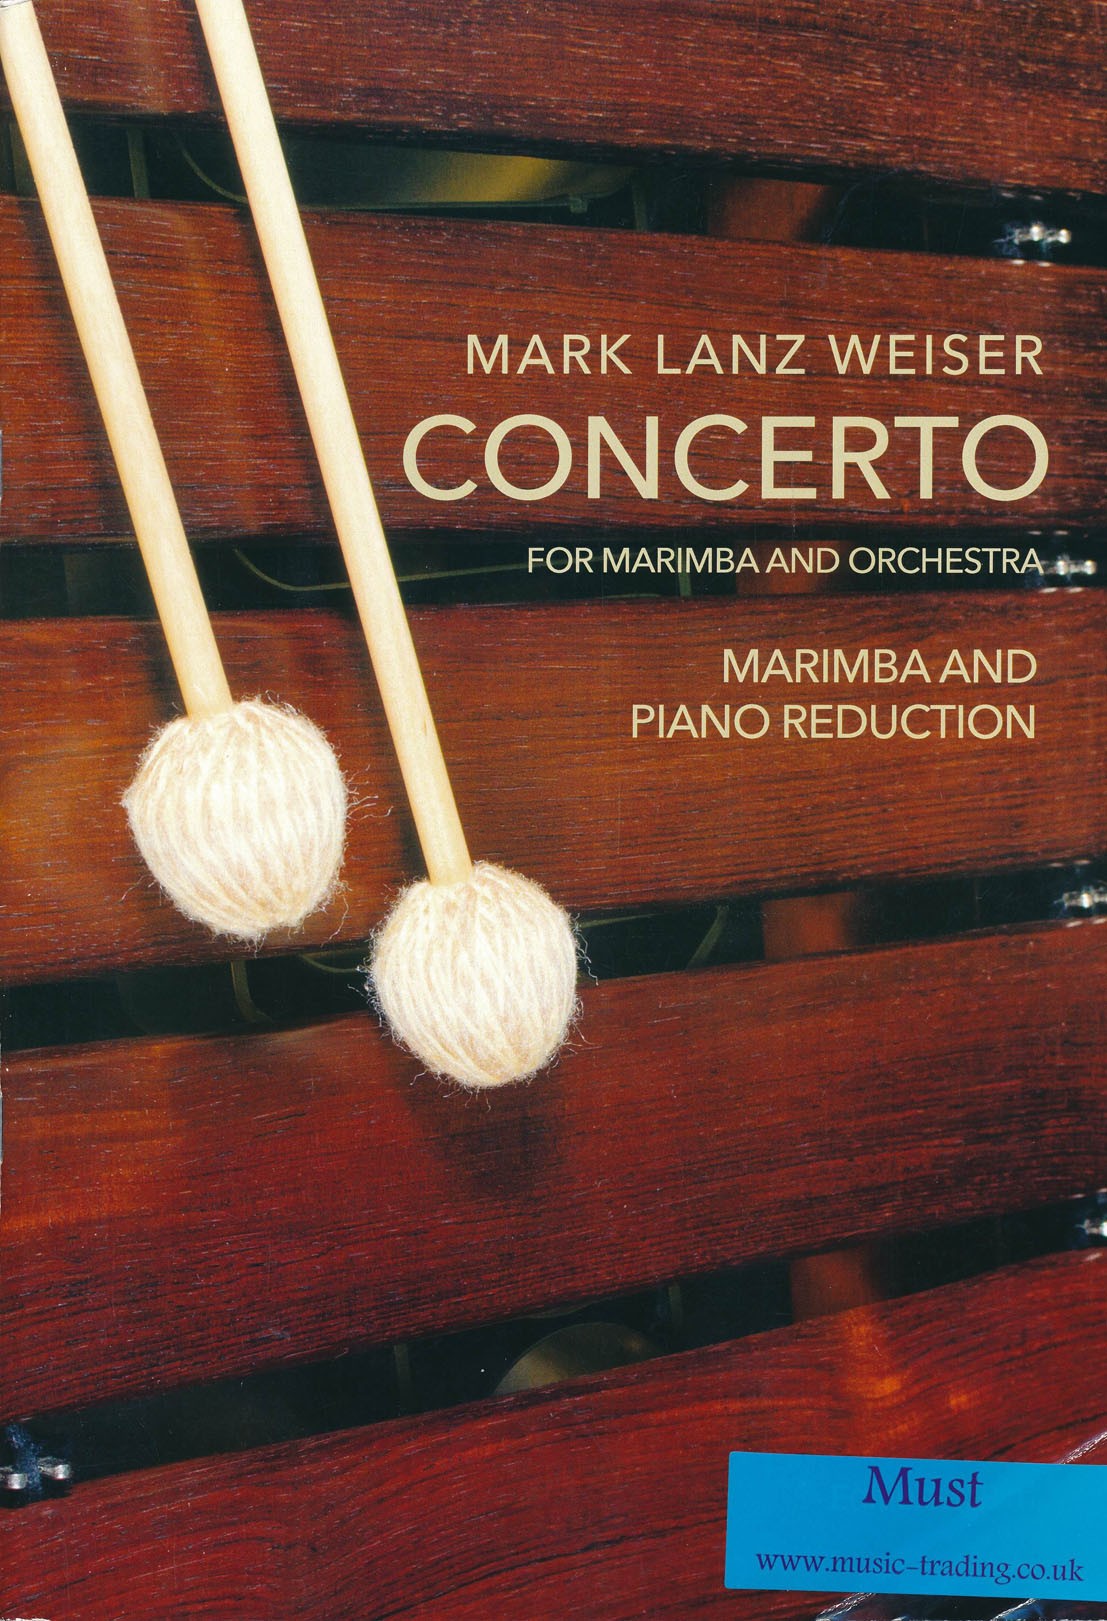 Concerto for Marimba and Orchestra (piano reduction) by Mark Lanzc Weiser